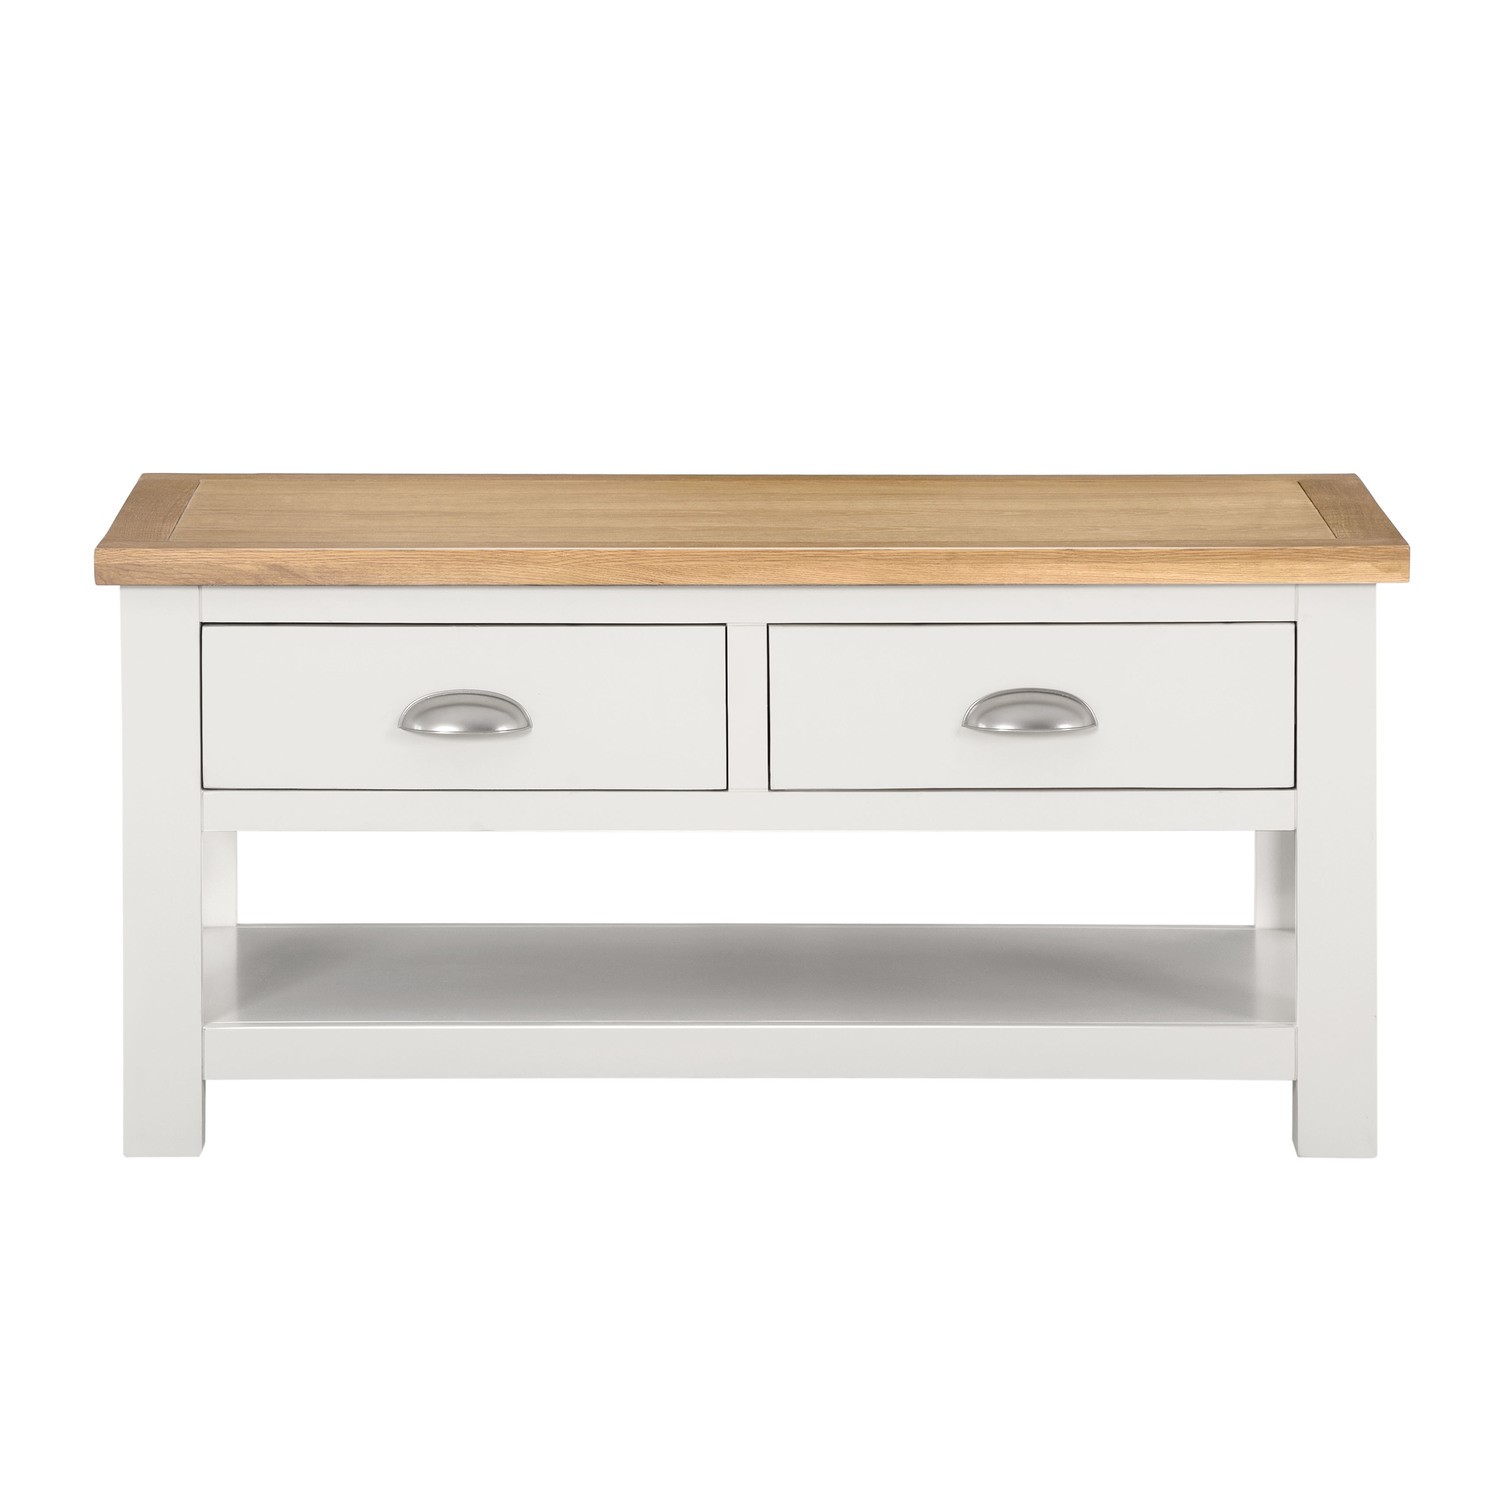 Willow Coffee Table In Painted Two Tone Cream Oak With Storage